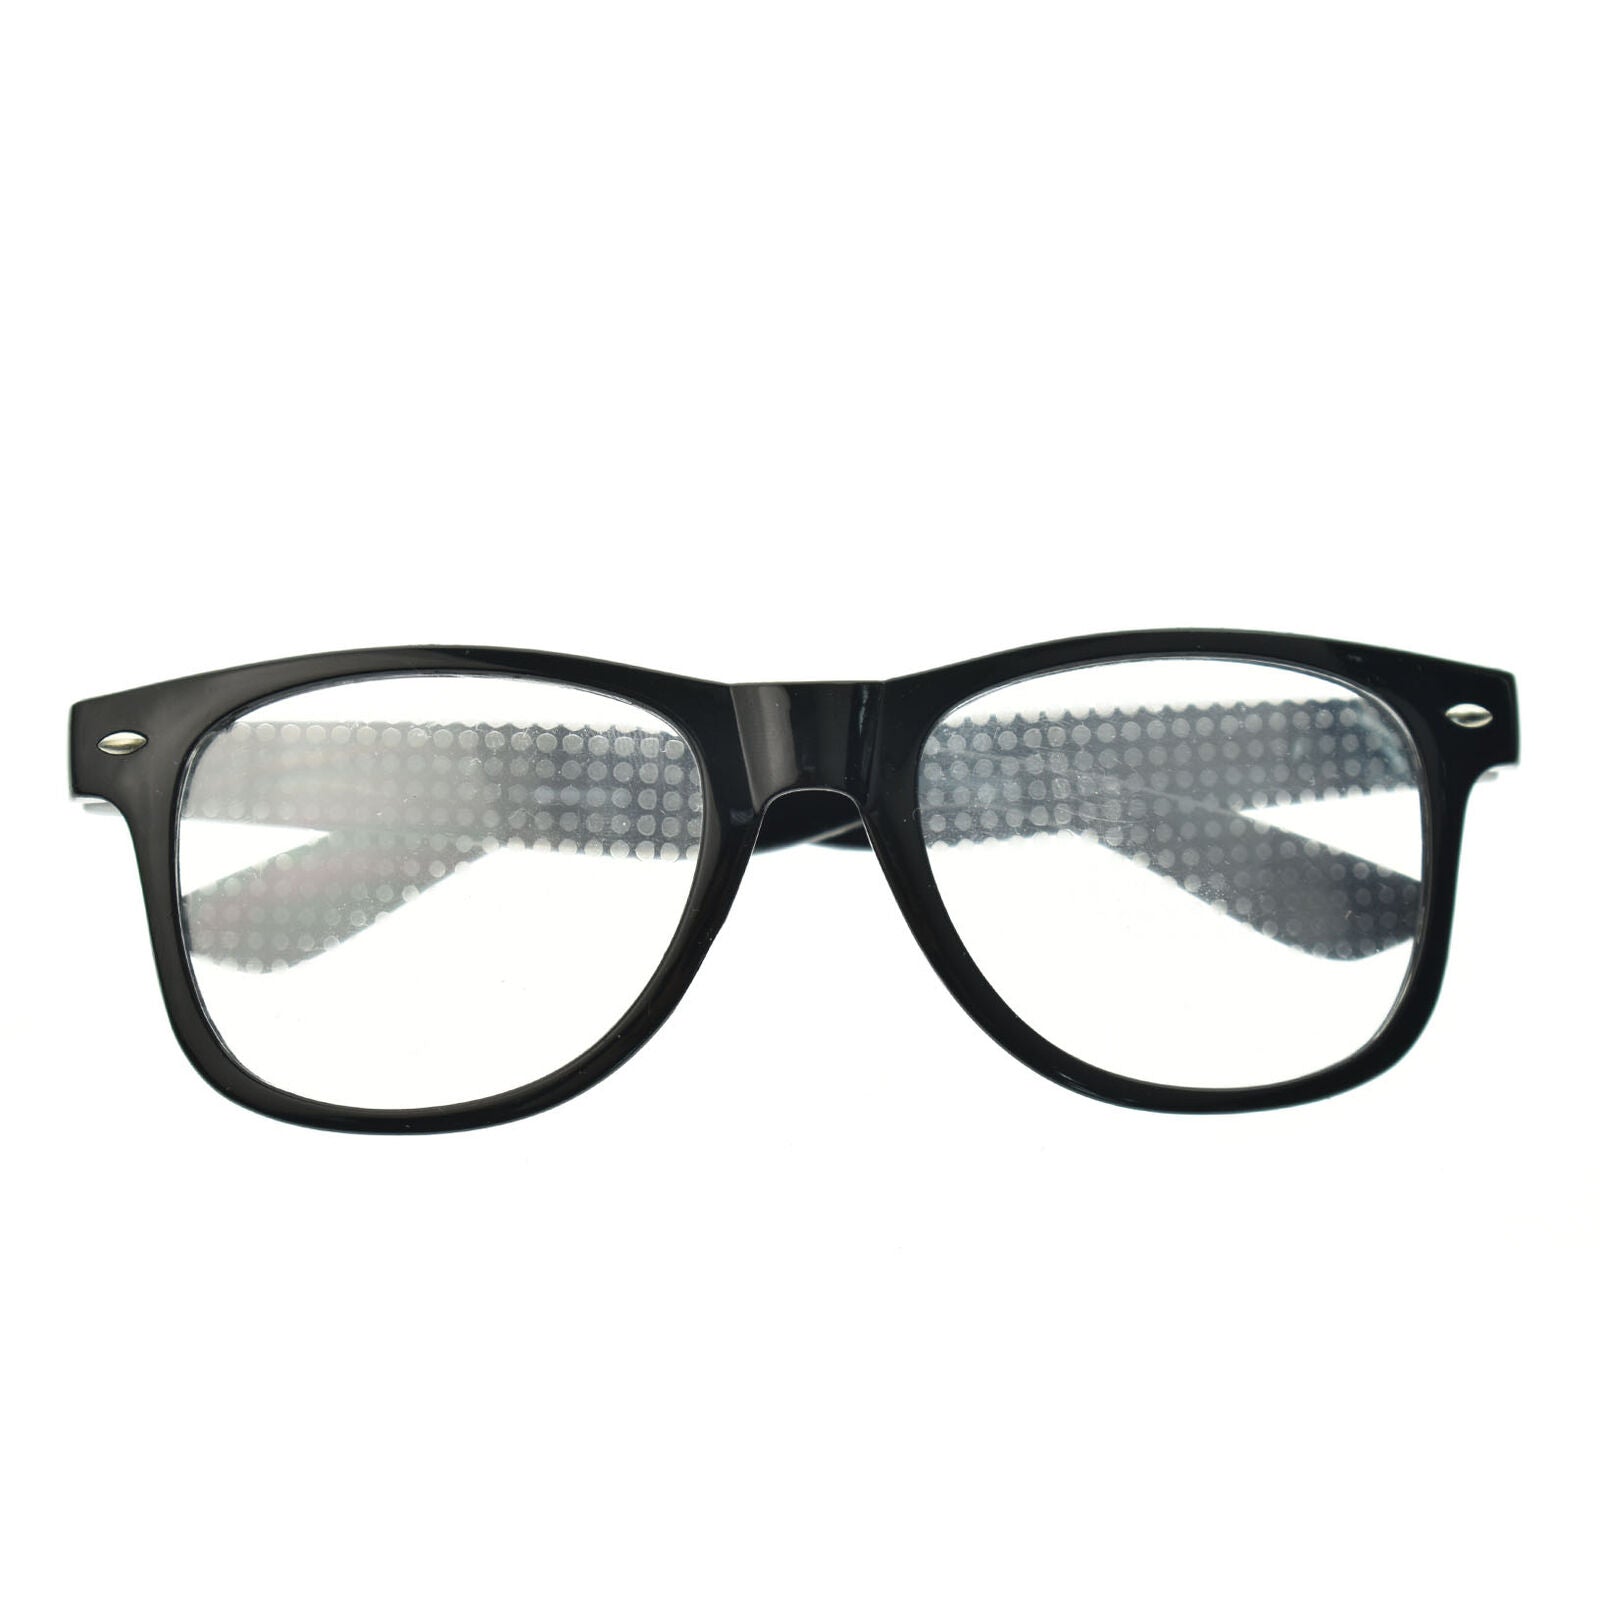 Diffraction glasses with heart-shaped glasses-see hearts! Rave Lights sunglasses